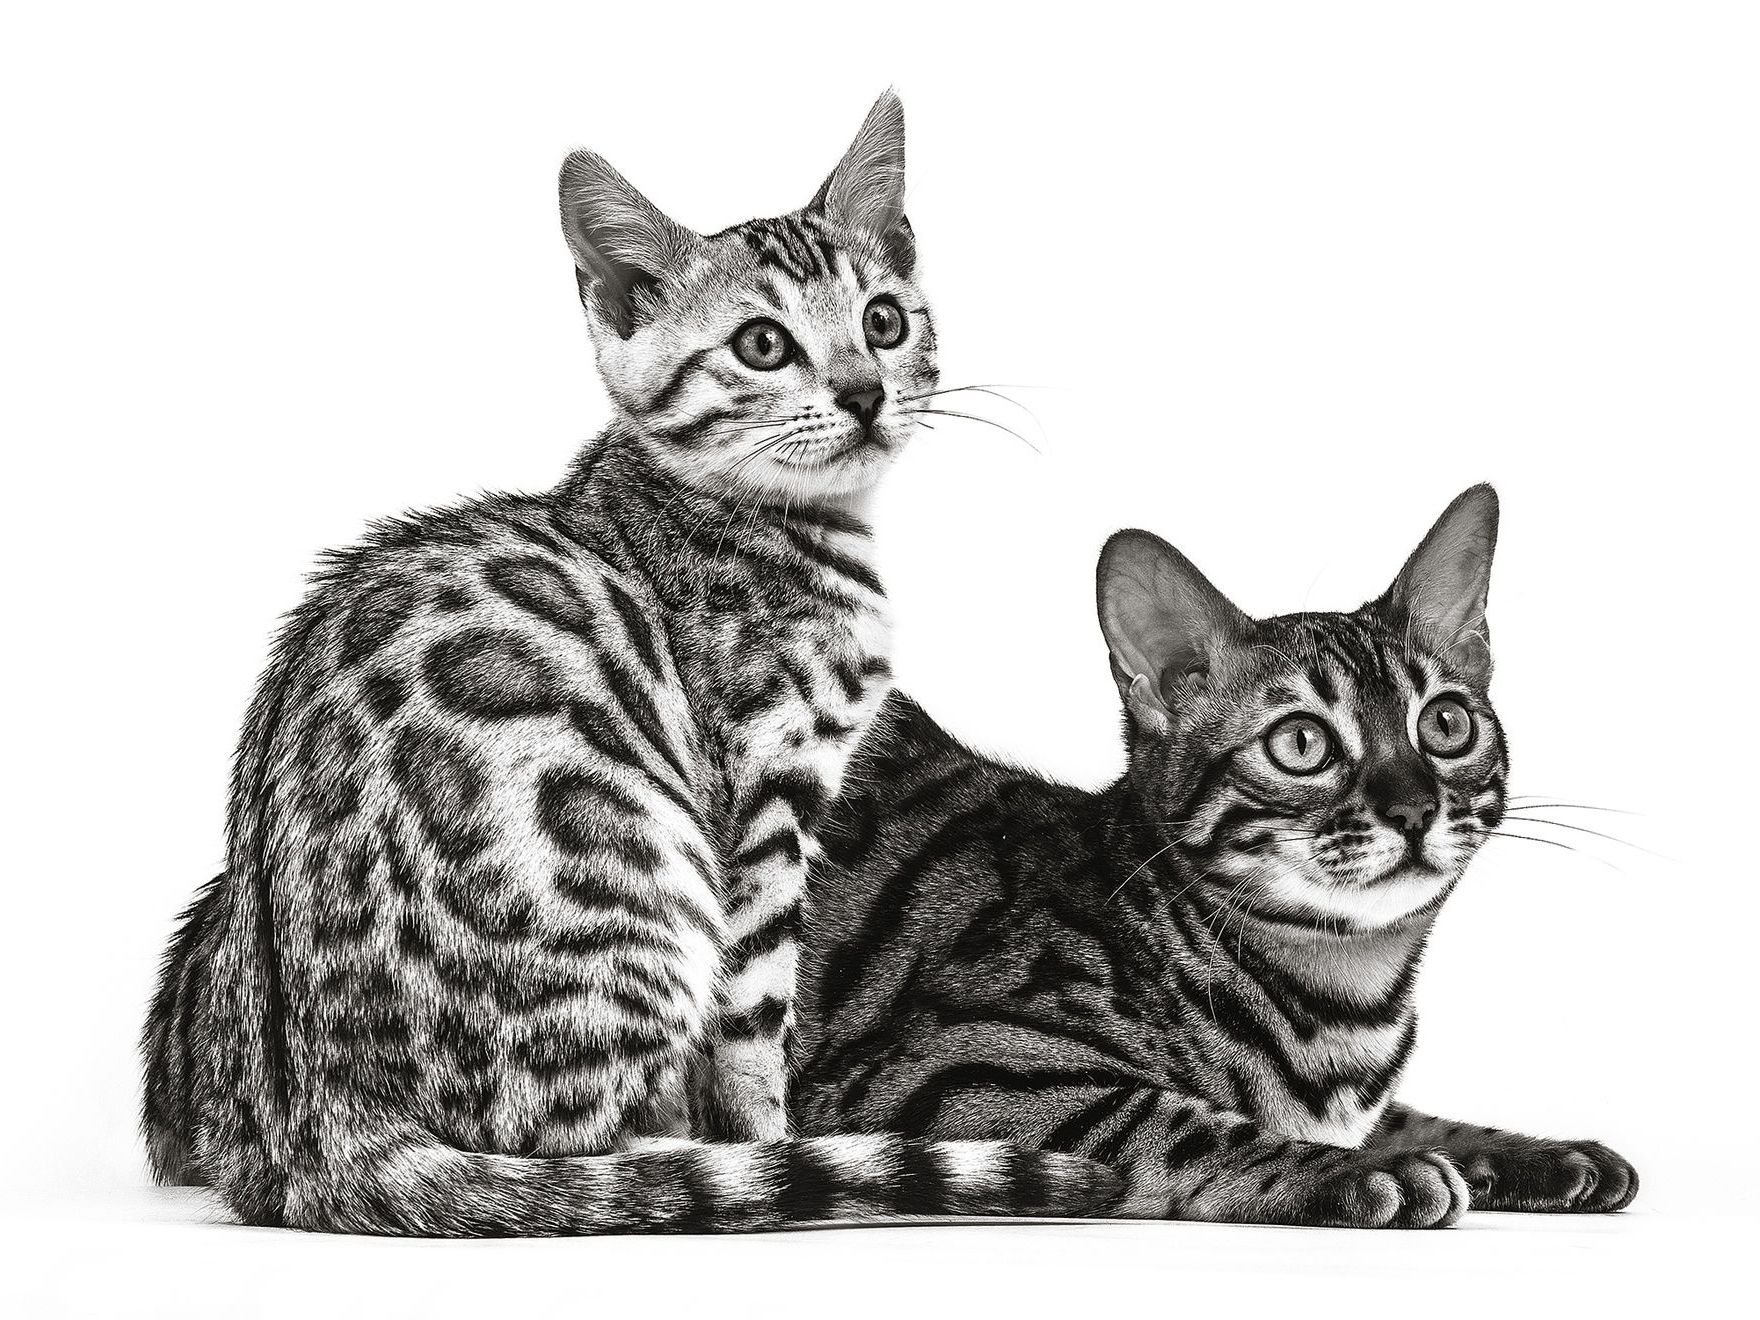 Two Bengal cats, one sitting, one lying, in black and white